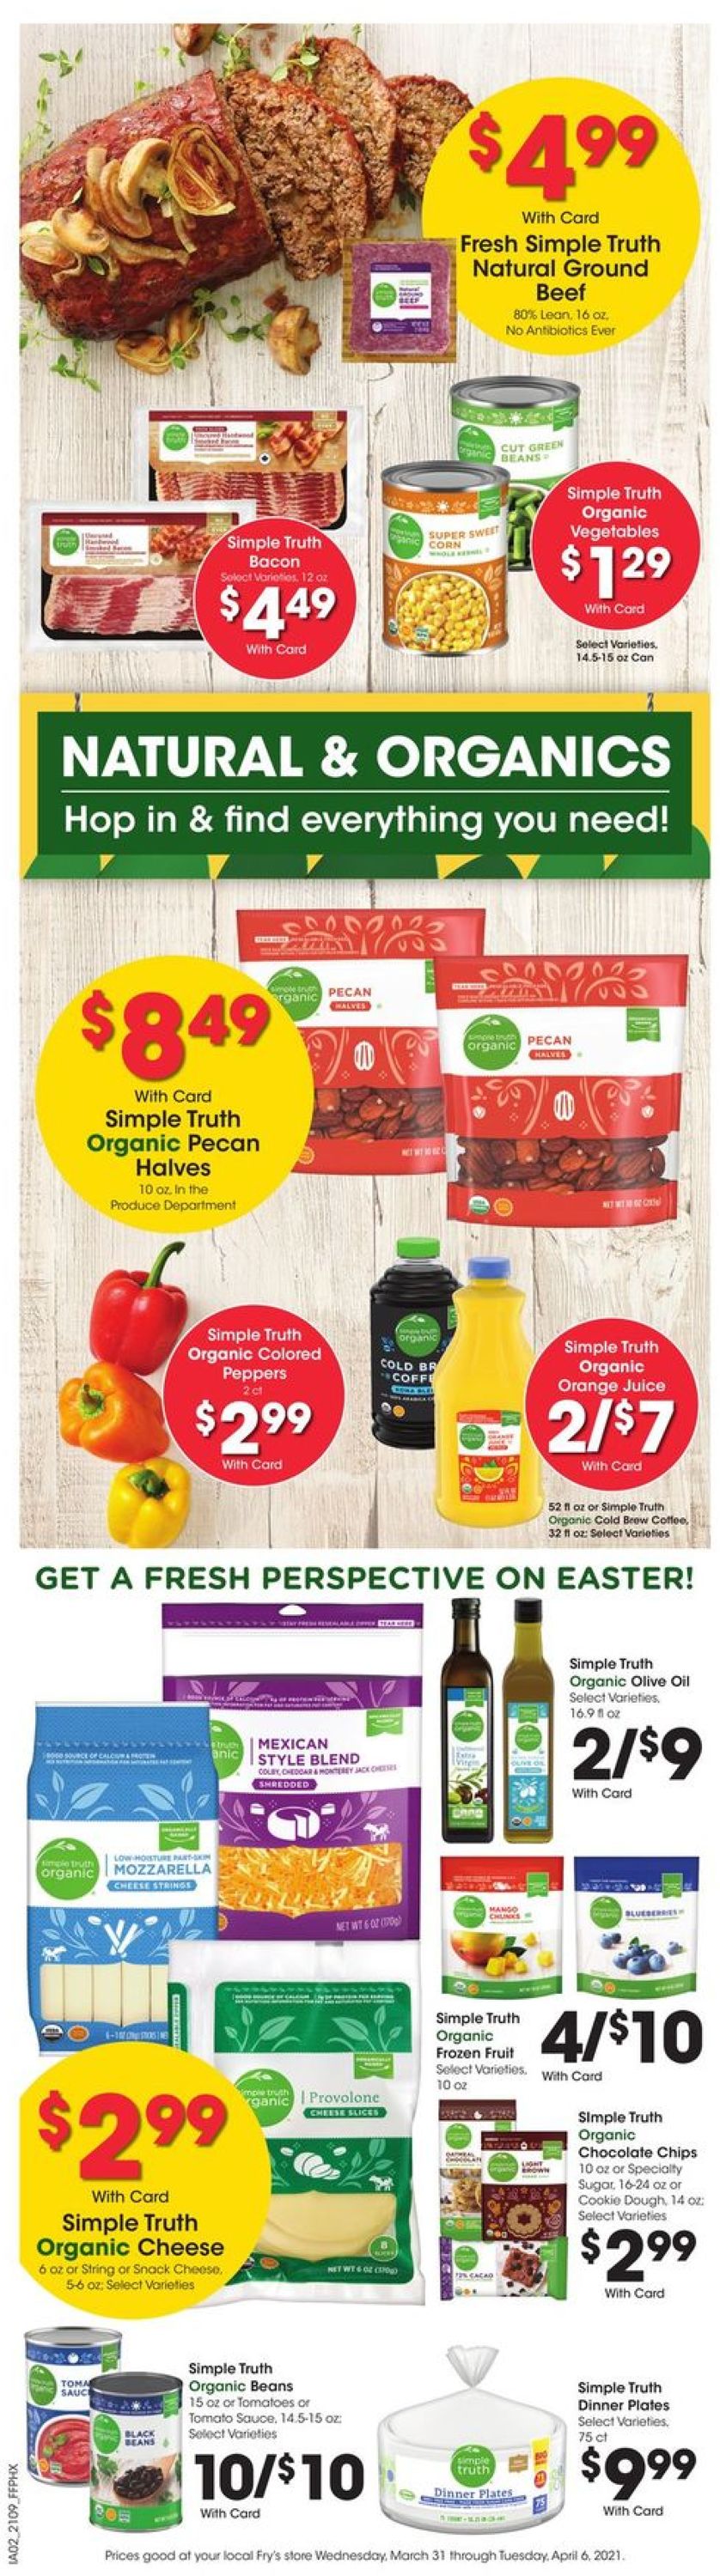 Fry’s - Easter 2021 Weekly Ad Circular - valid 03/31-04/06/2021 (Page 7)